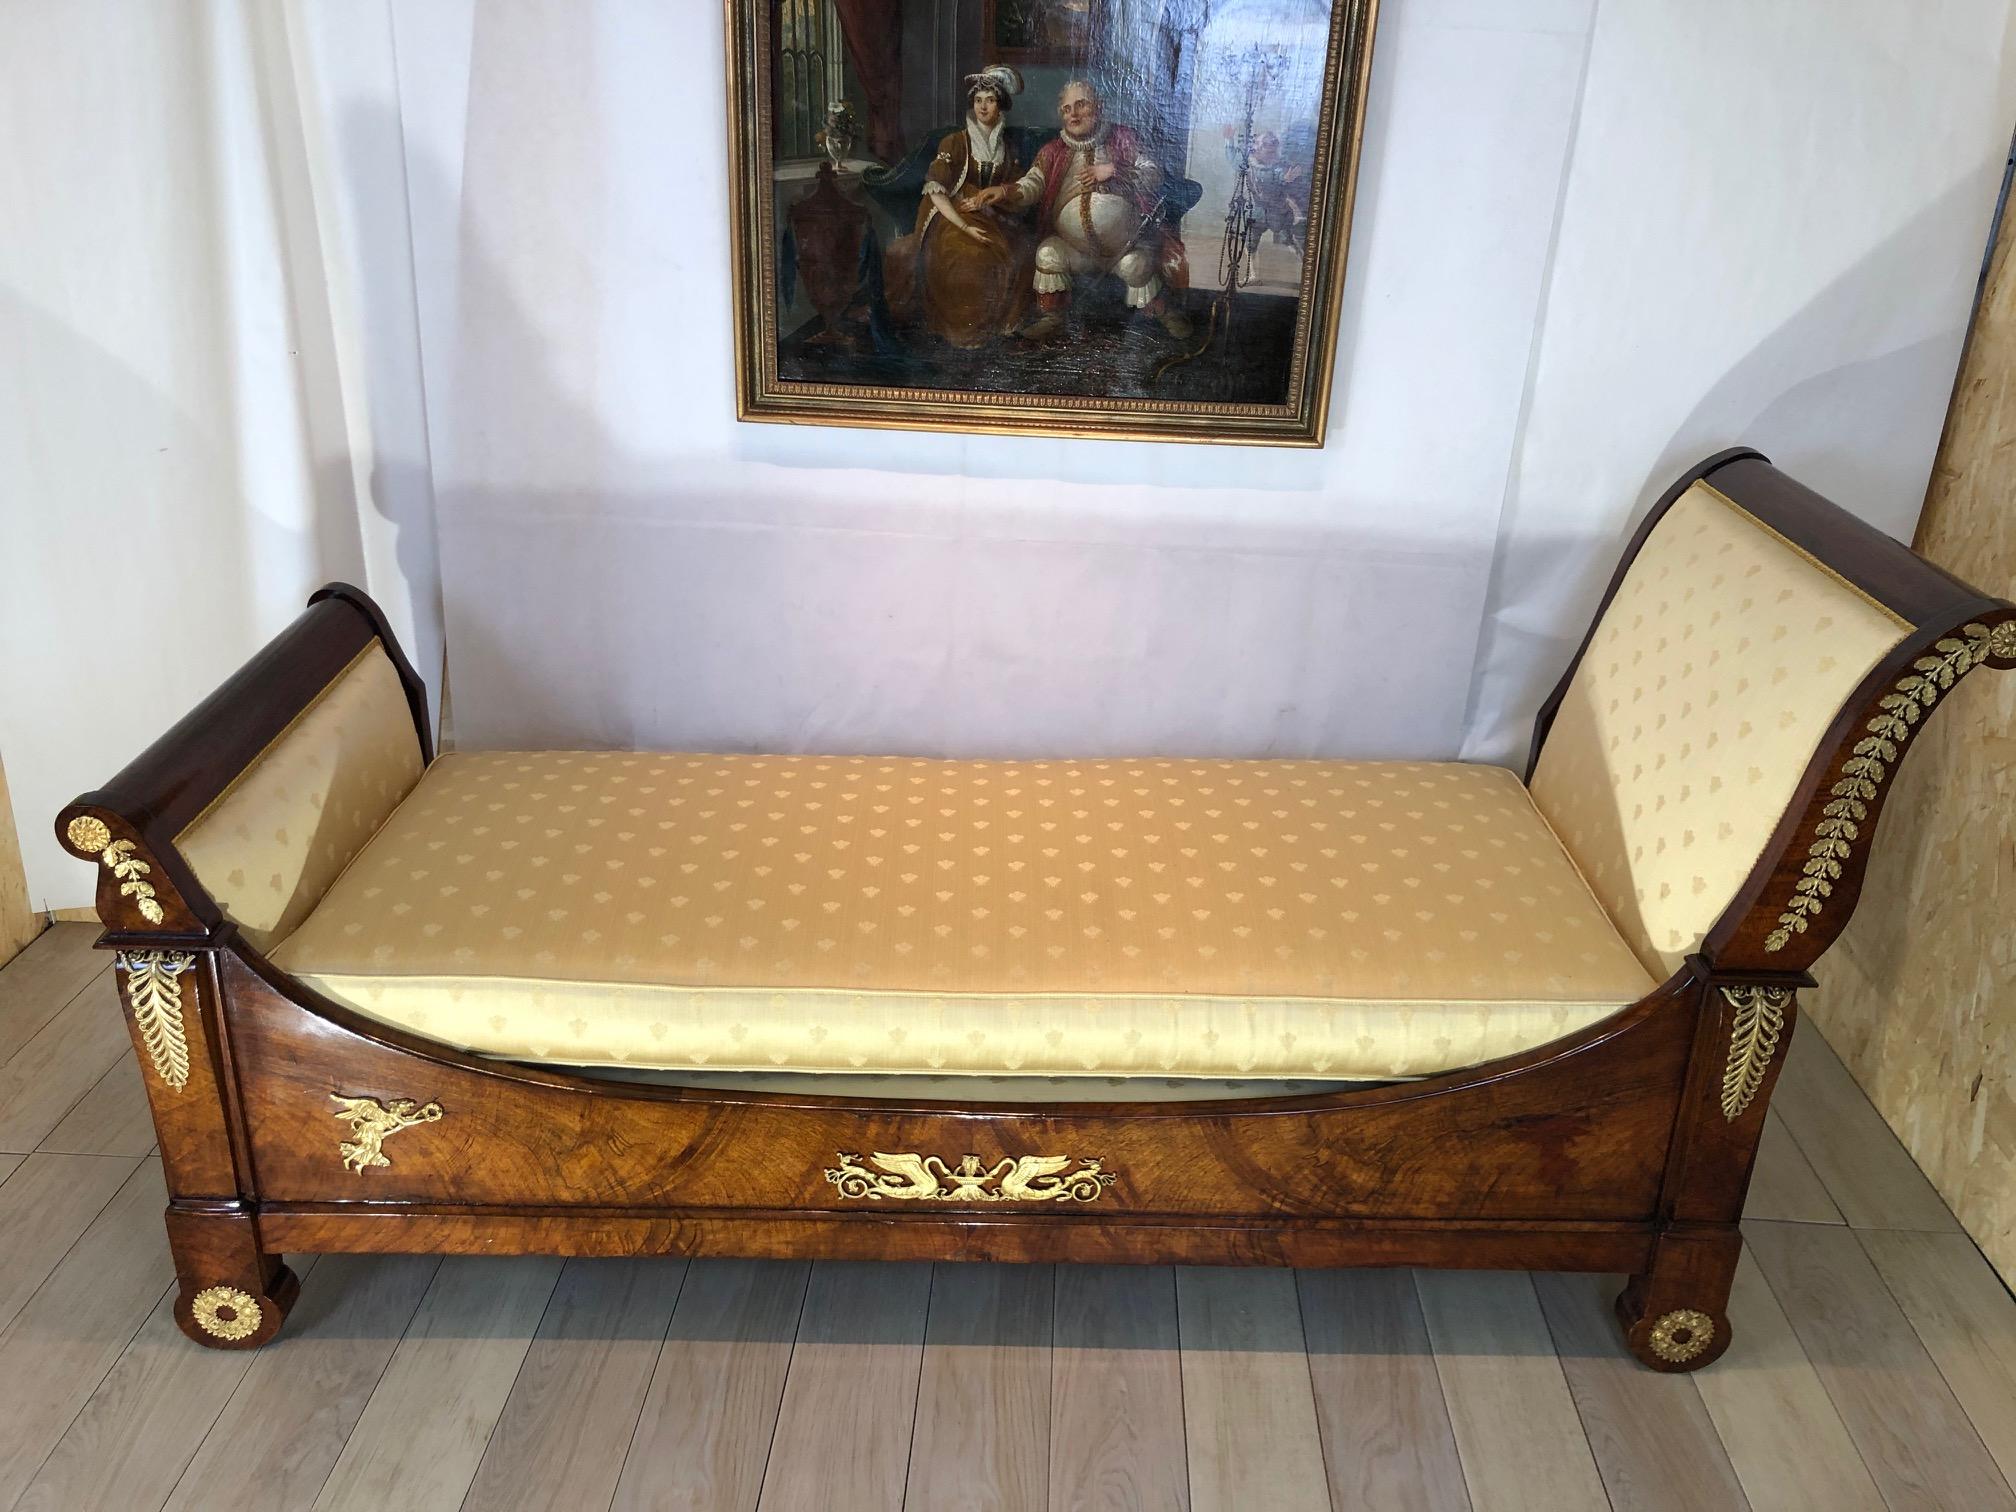 Early 19th century Empire style French dormeuse in burr walnut and gilded bronze decorations.

Dimensions:
Height 100 cm, length 200 cm, depth 70 cm

It's already restored by our atelier.
 